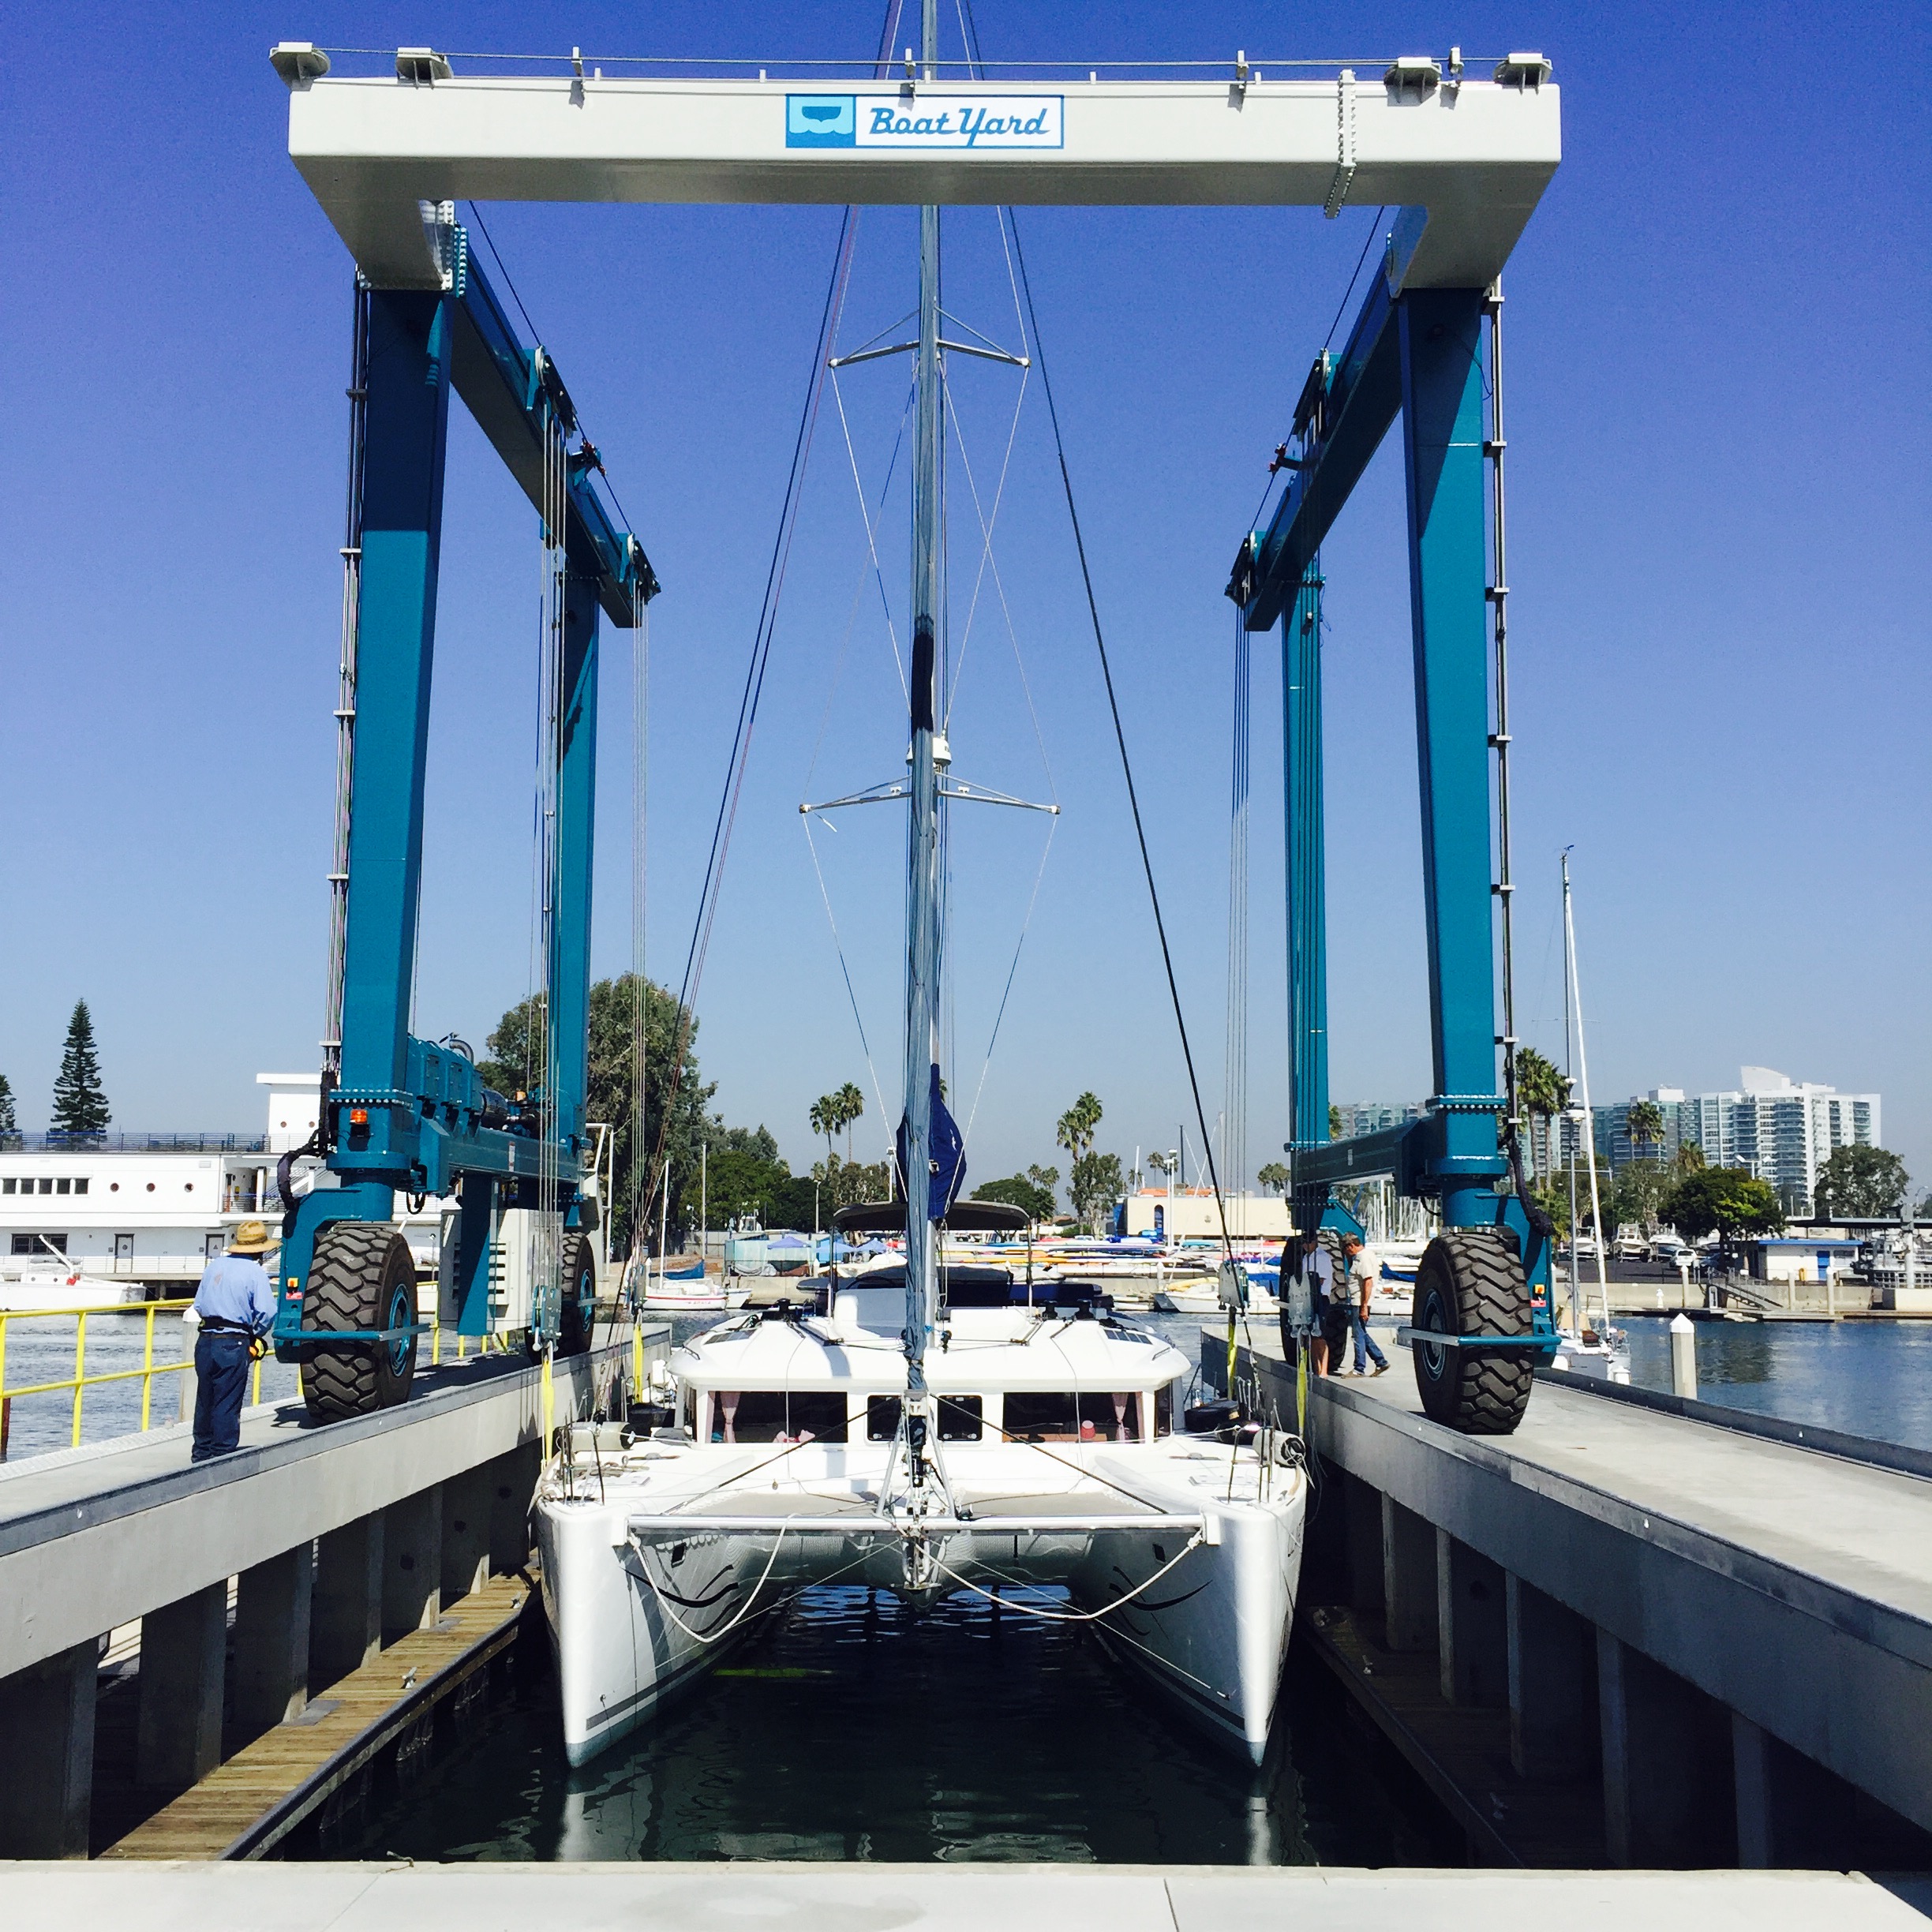 The Boat Yard In California Prepares For Larger Vessels Marina Dock Age